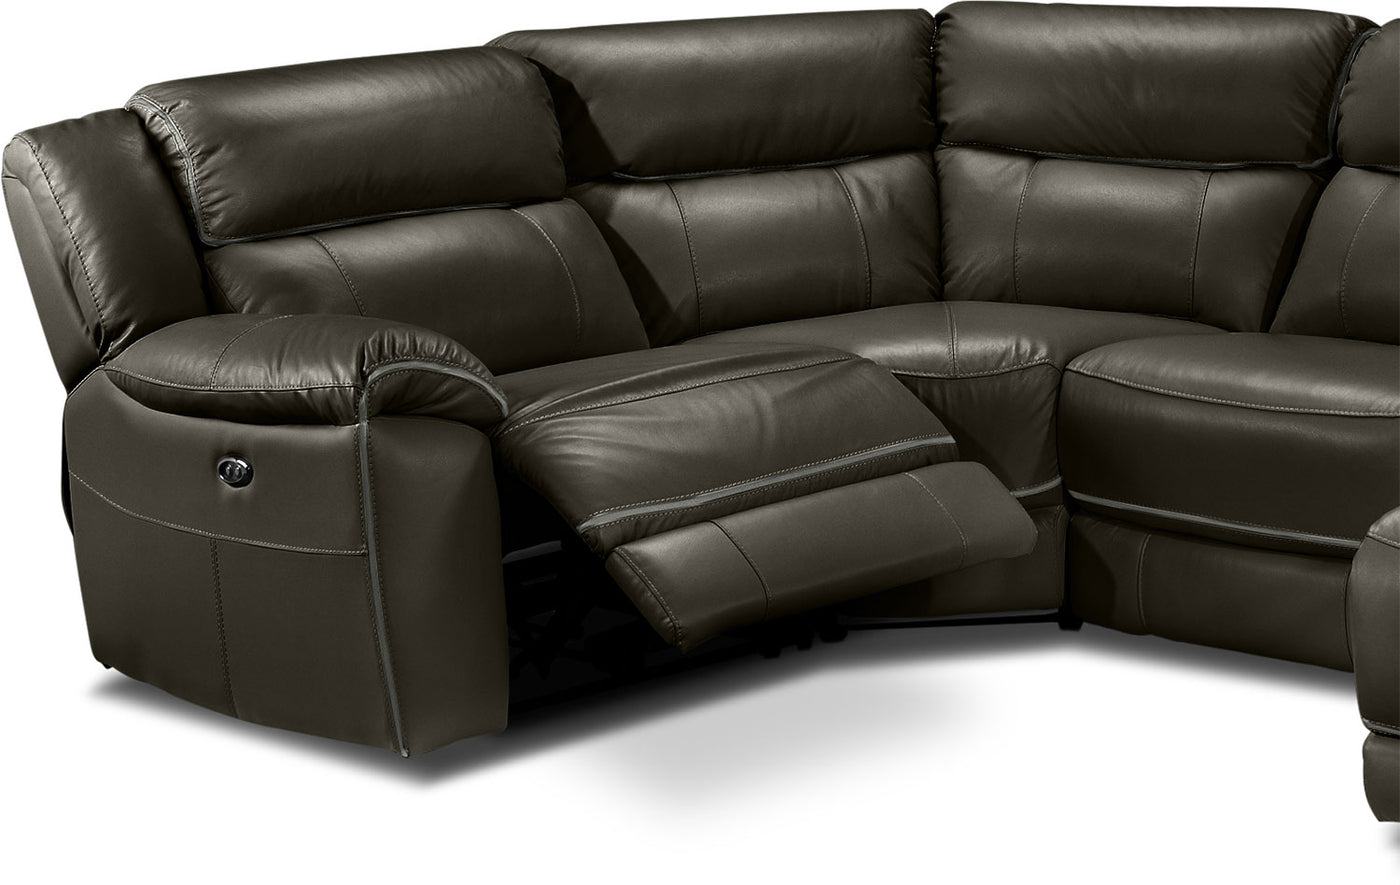 Holton Leather 5-Piece Sectional with Right-Facing Chaise - Charcoal Grey